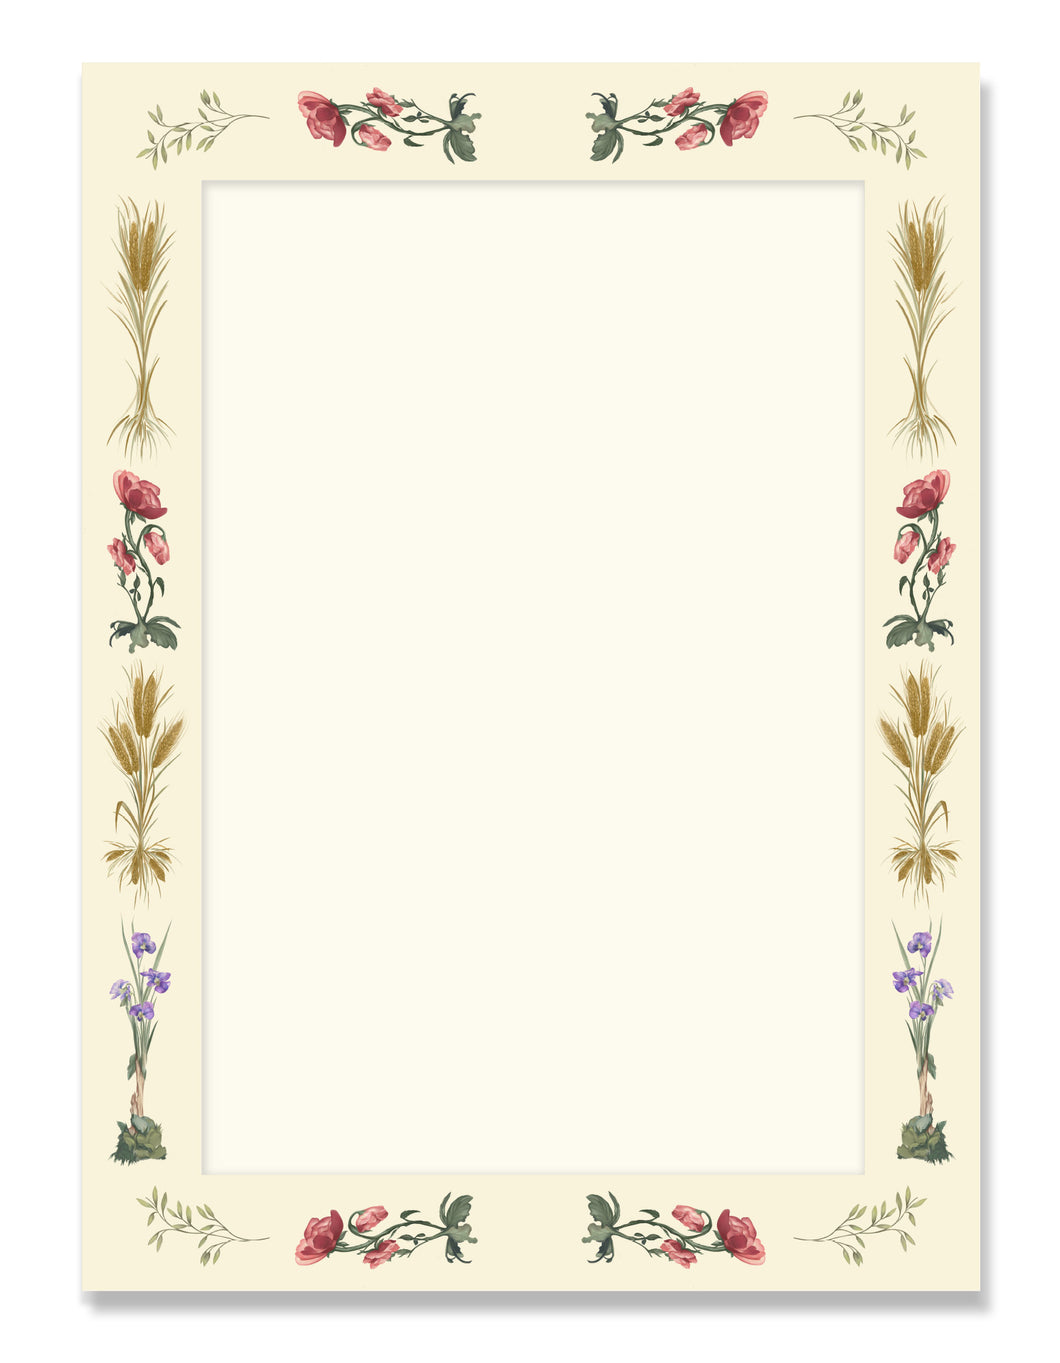 FLEUR X Over The Moon - Toujours Wall Frame